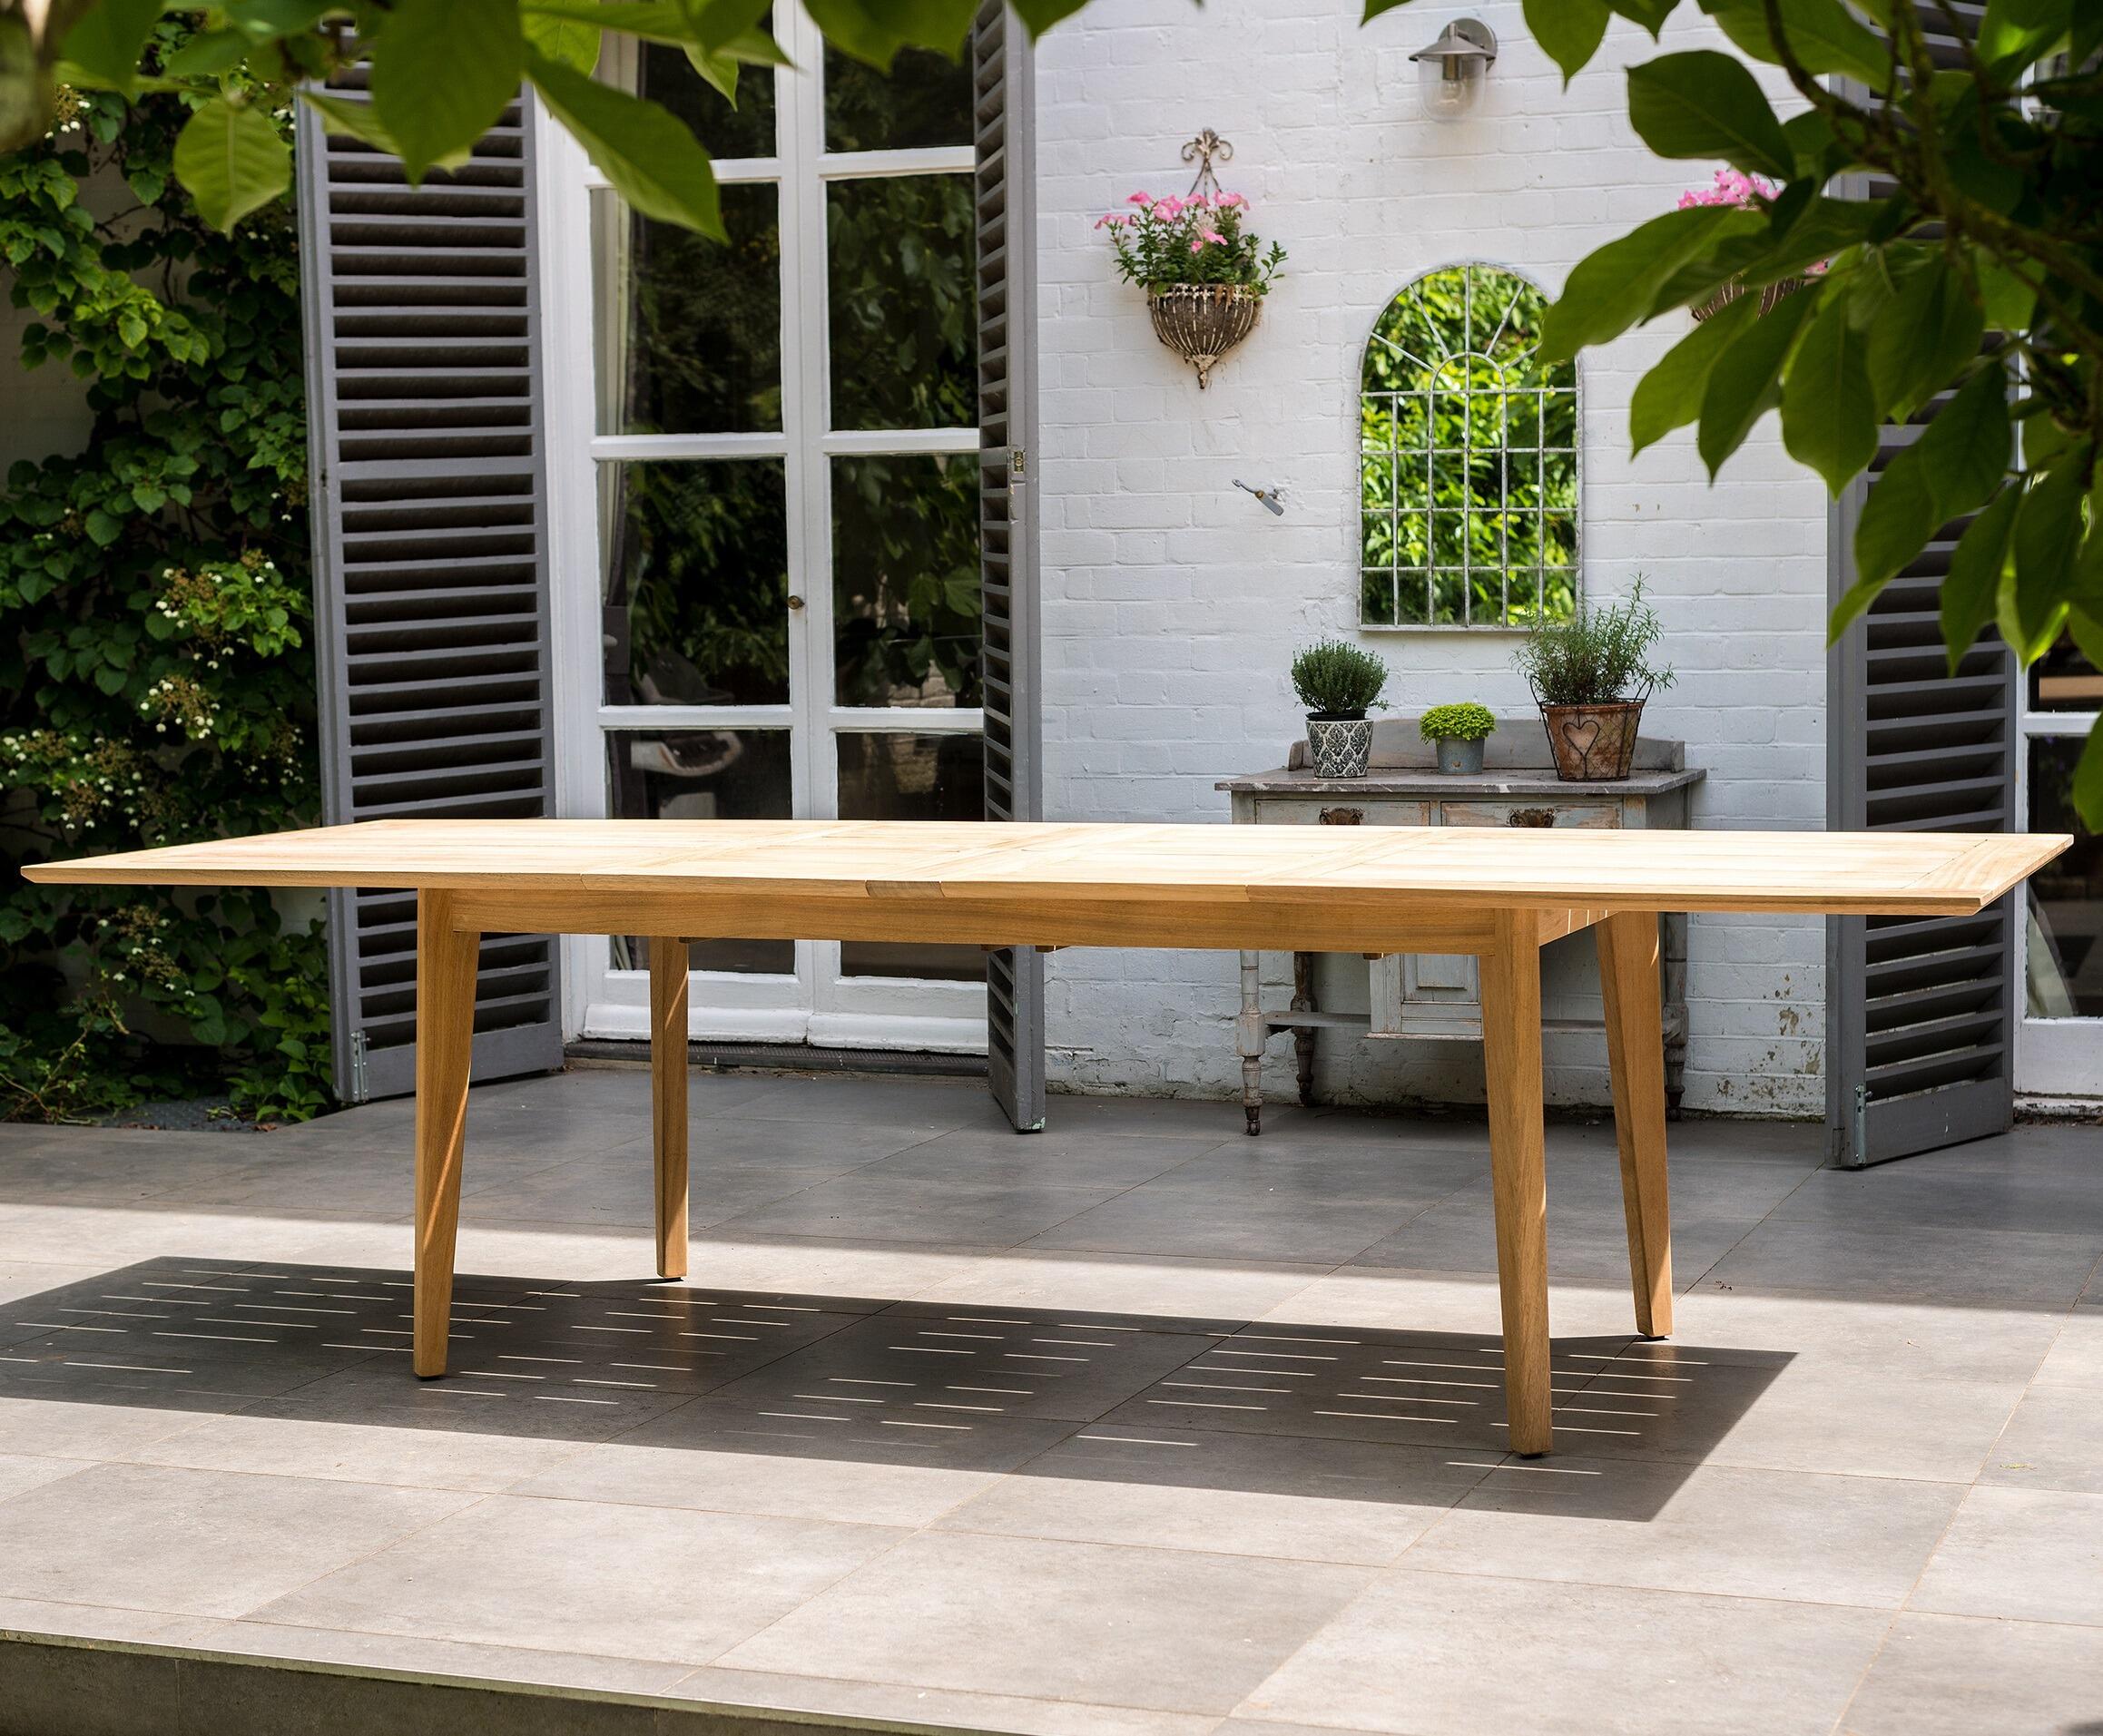 extending patio dining table large roble hardwood outdoor wood